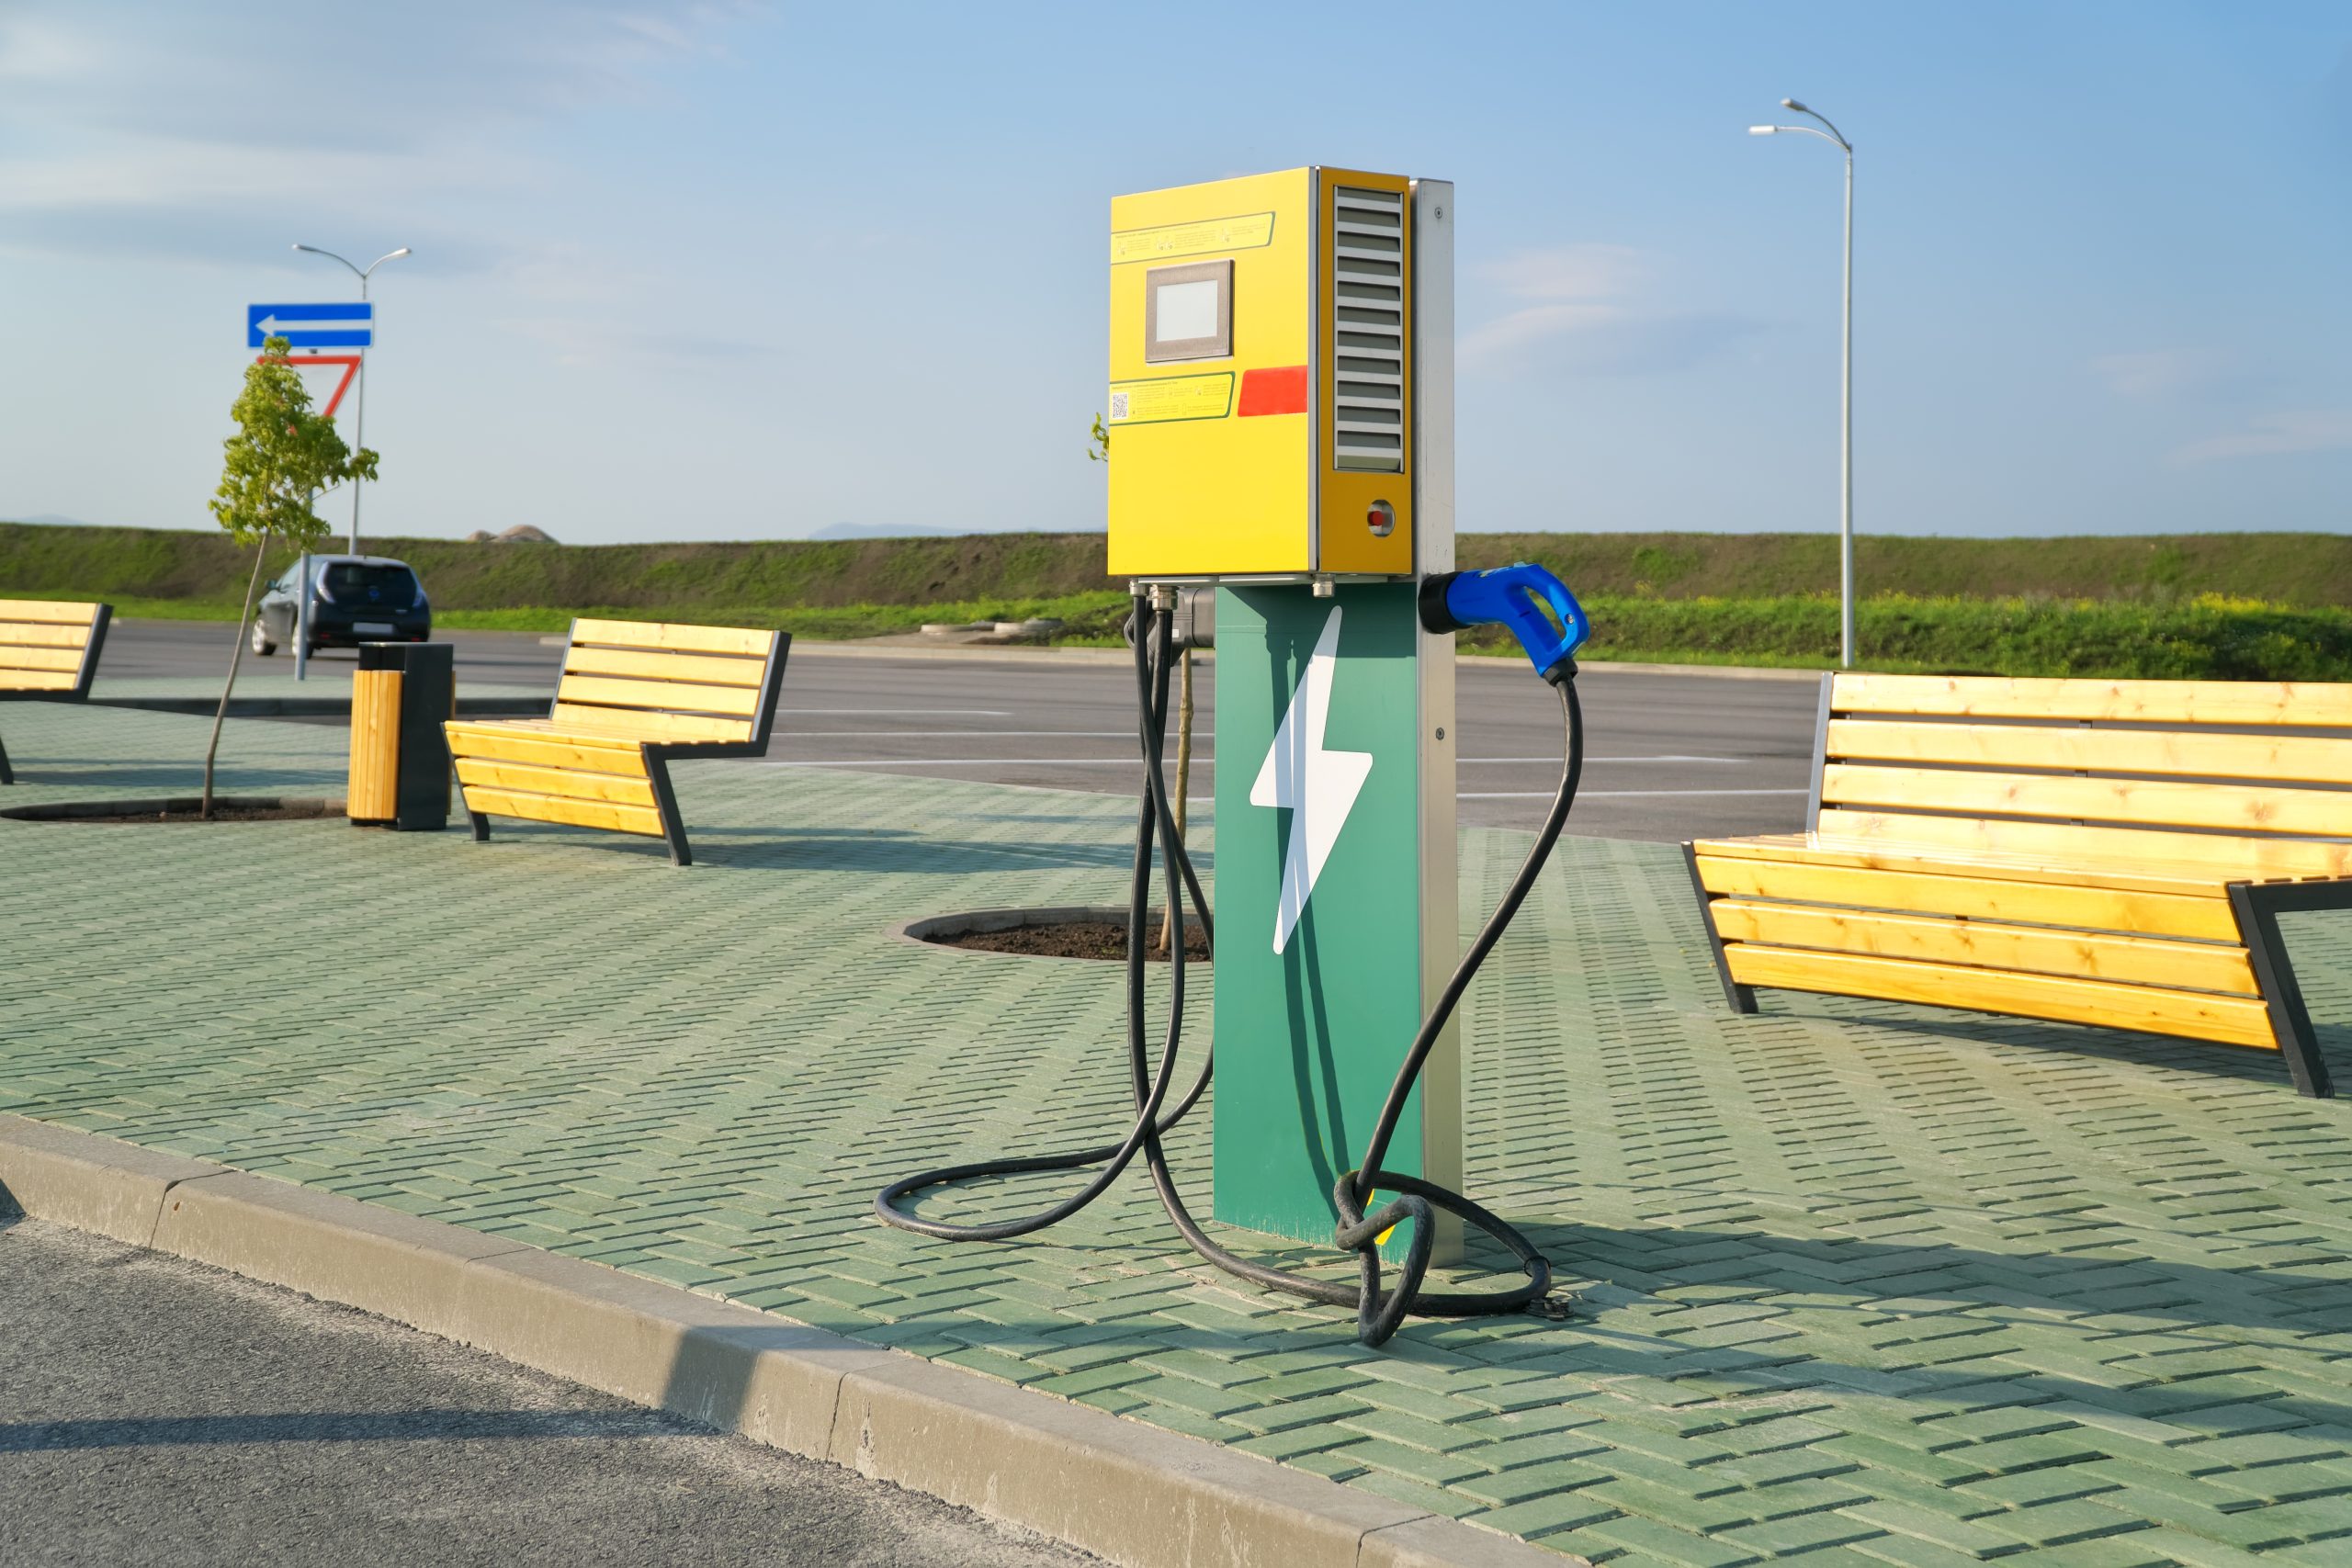 Parking at a public charging station: what are the rules?